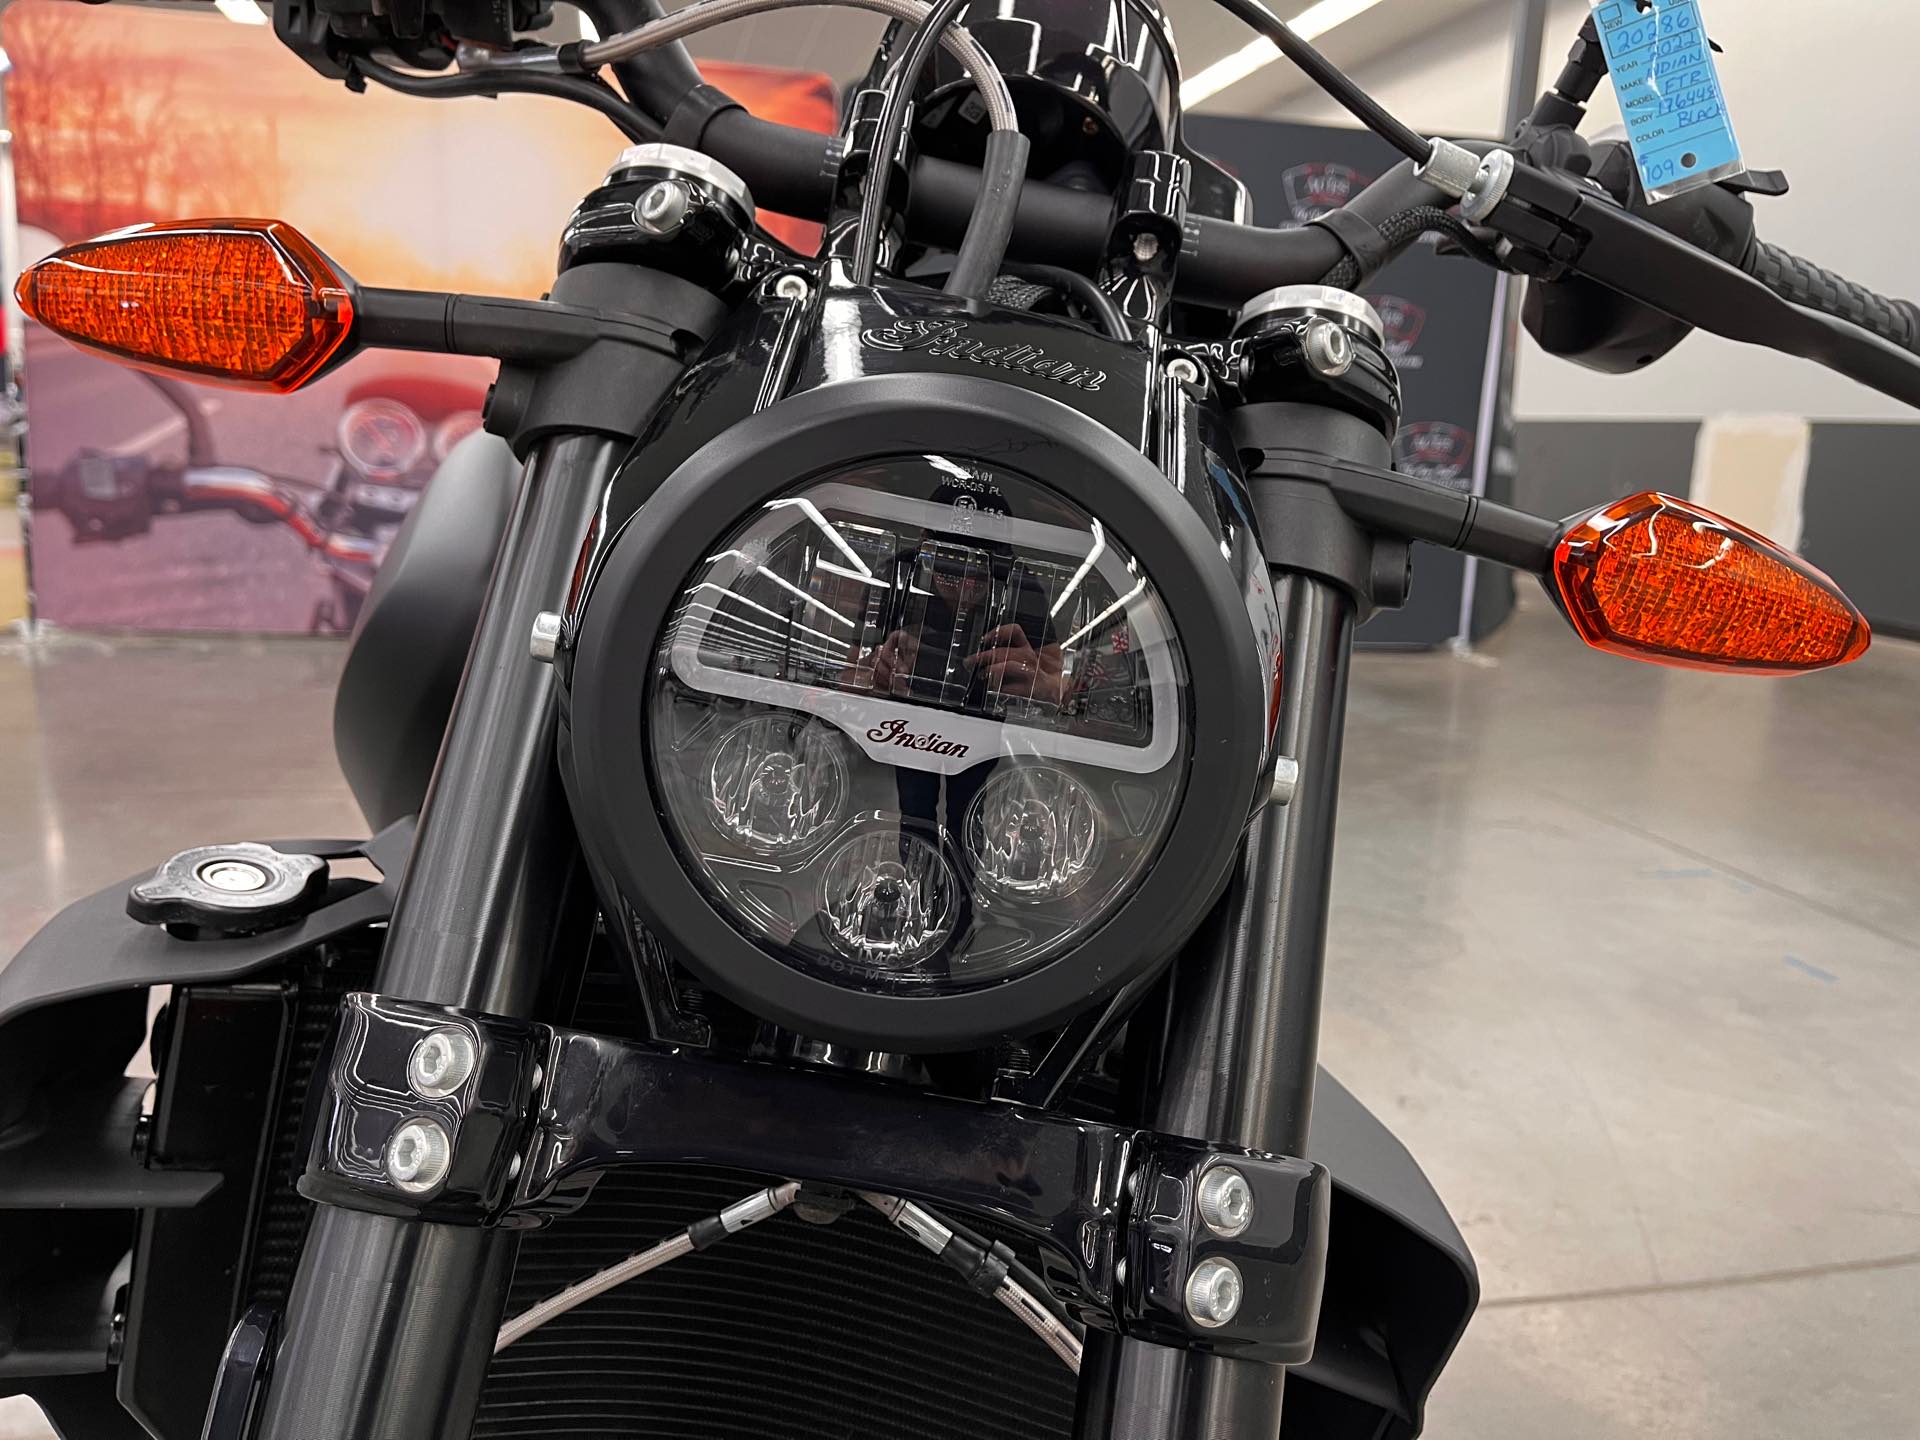 2022 Indian Motorcycle FTR Base at Aces Motorcycles - Denver